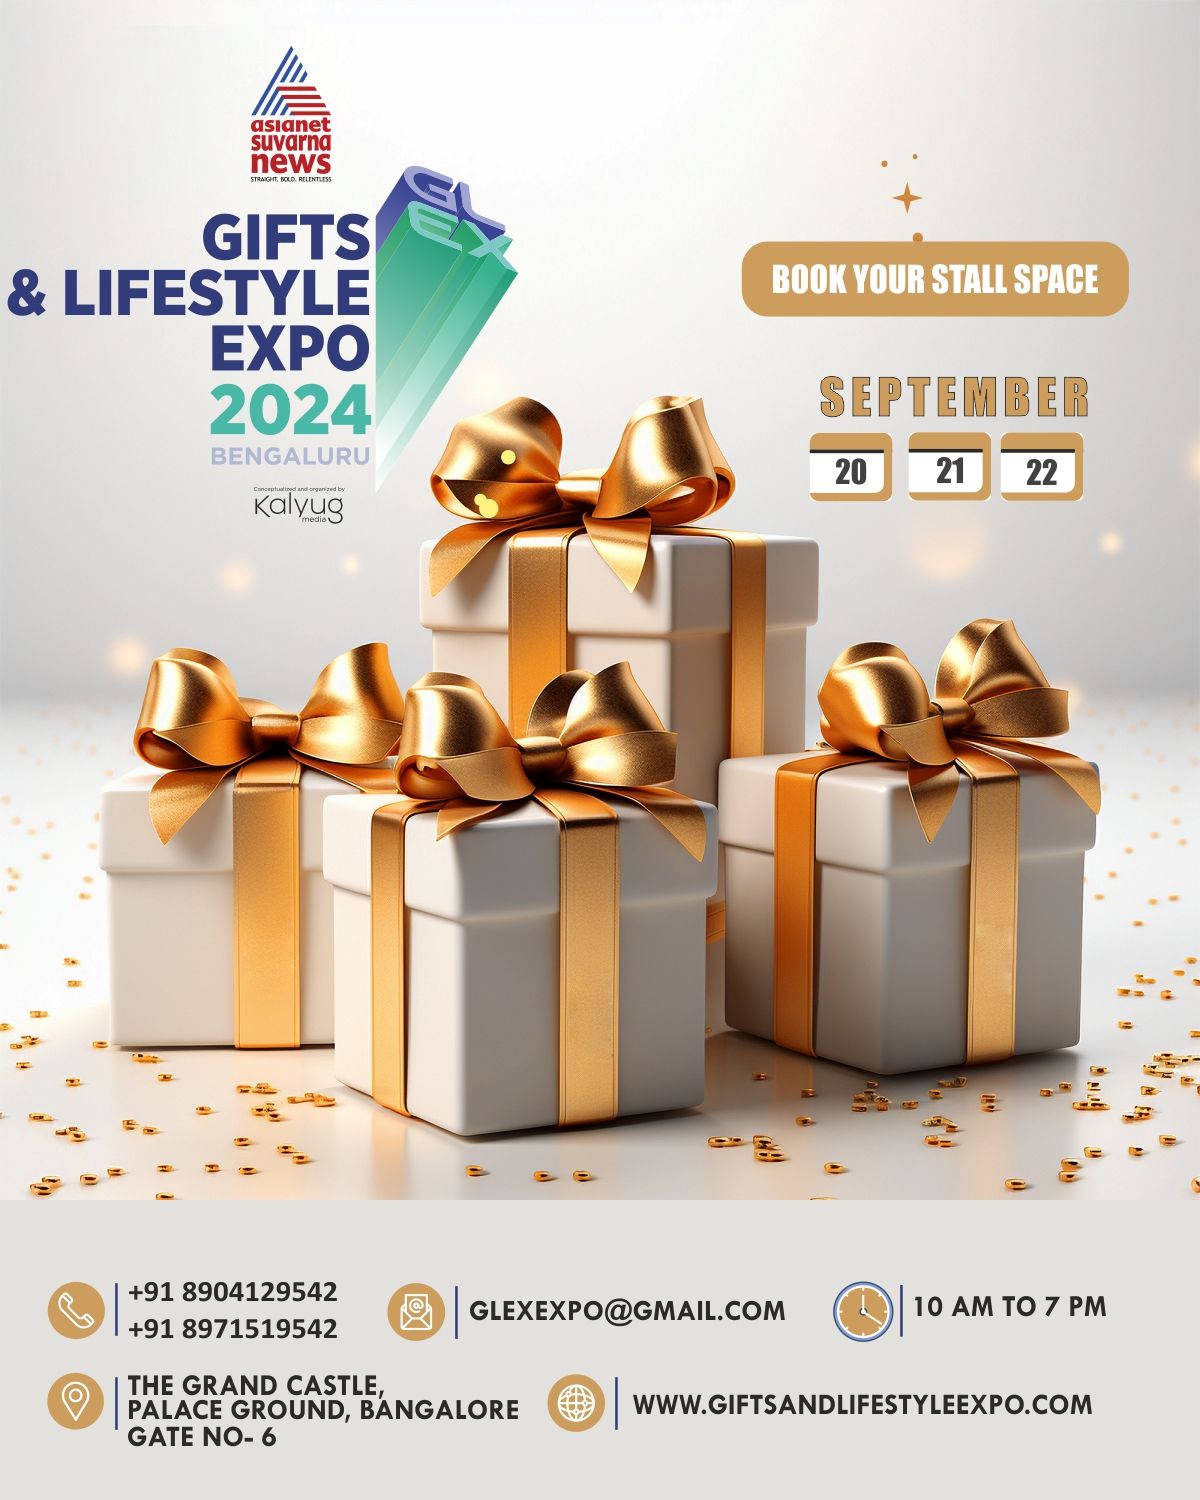 India's Largest GIFTS & LIFESTYLE EXPO 2024